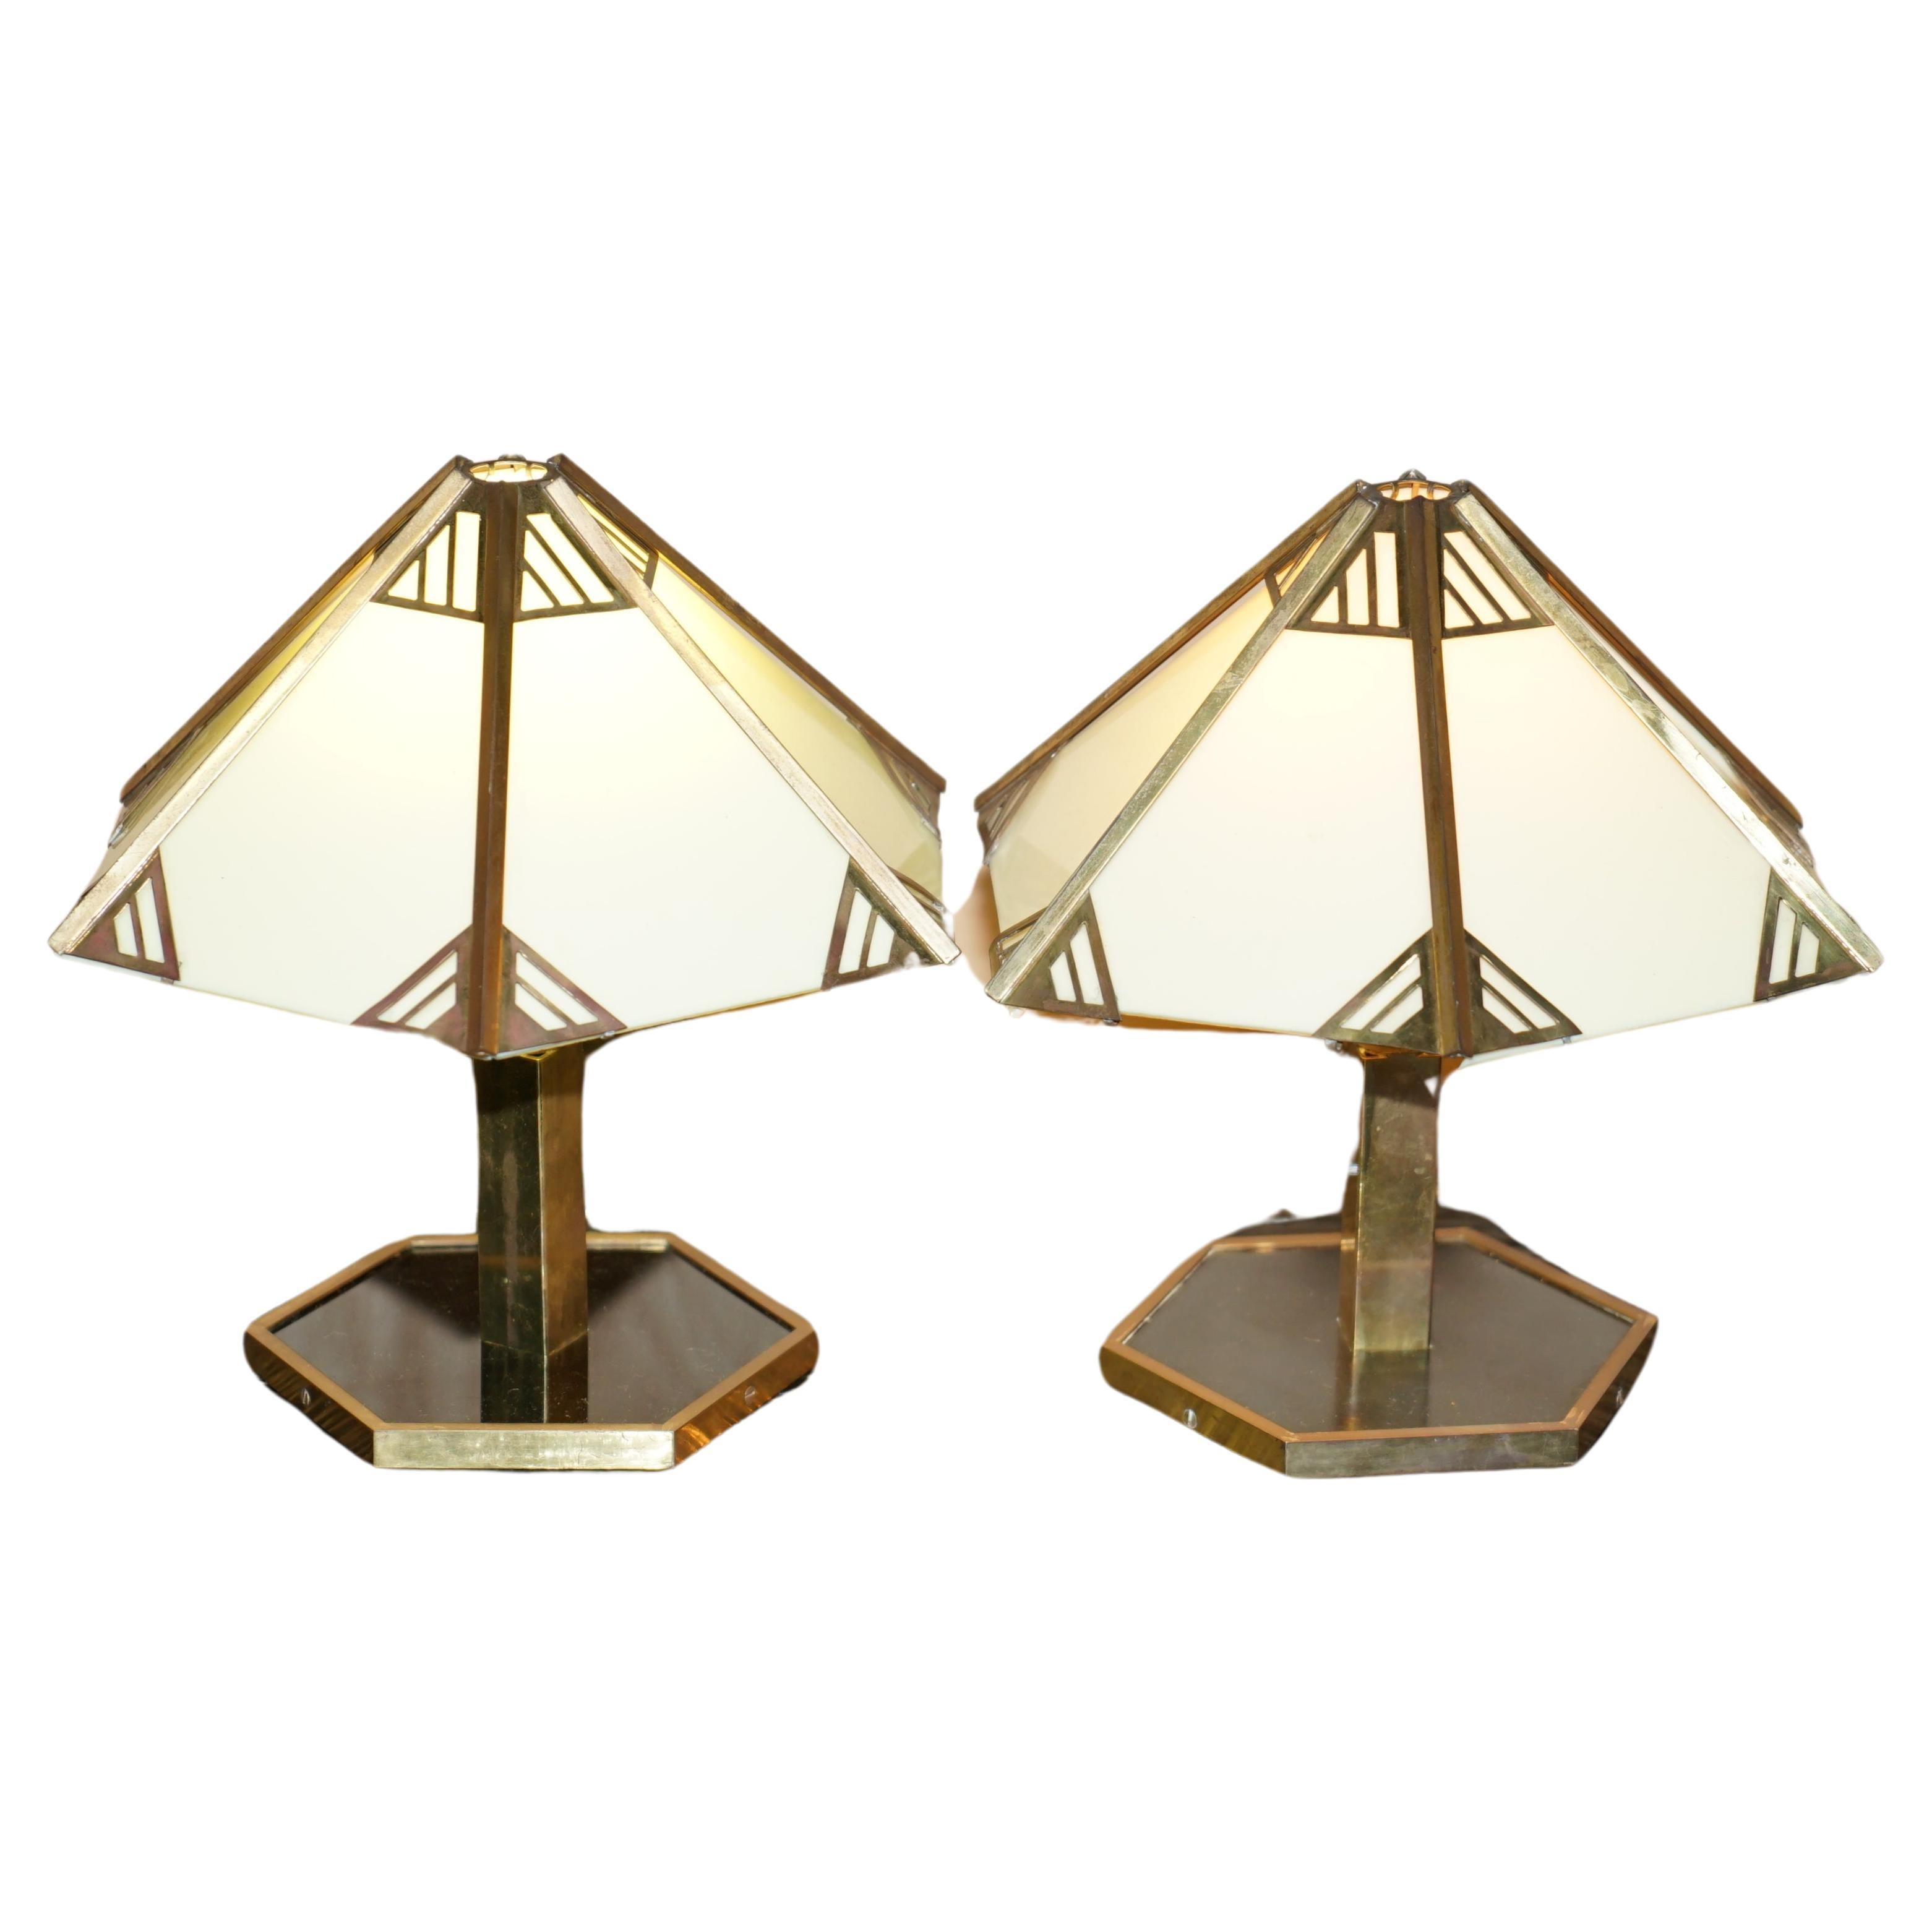 We are delighted to offer for sale this stunning pair of circa 1930-1940's Art Deco Brass & Lucite table lamps

A very good looking well made and decorative pair of mid century modern Italian table lamps

The lamps have been fully restored to